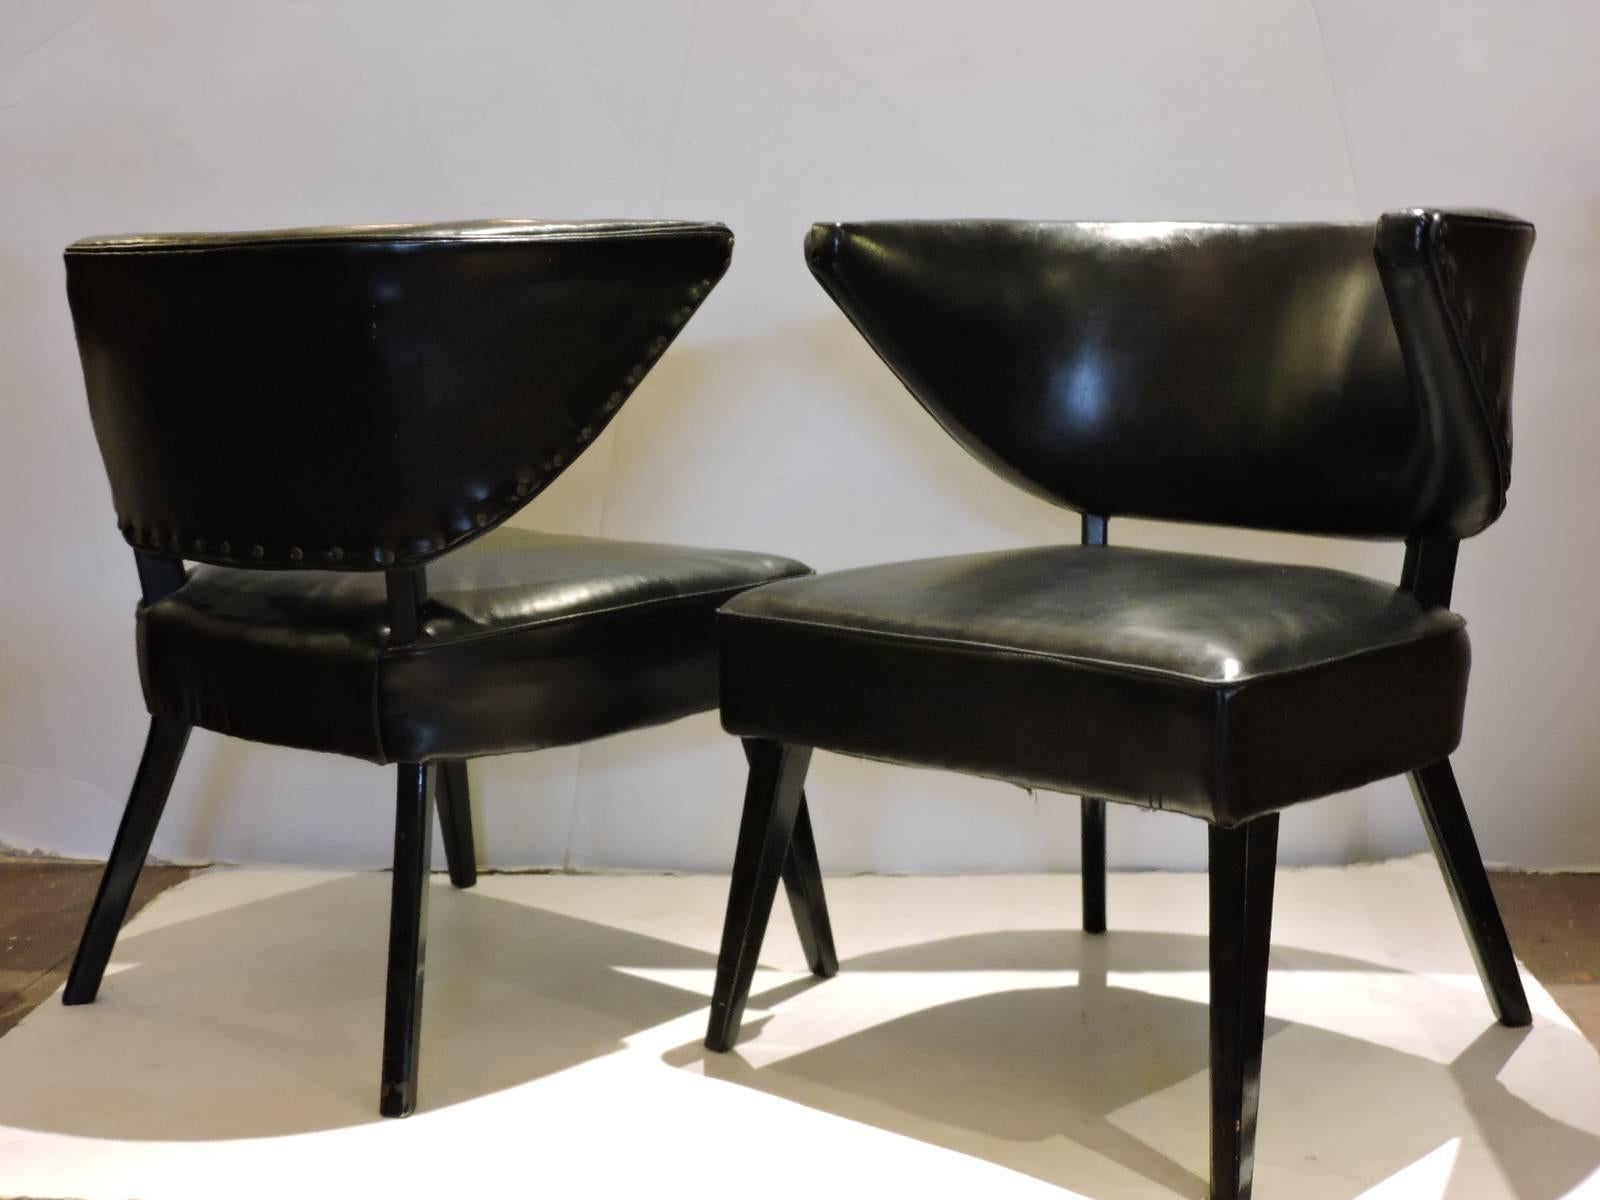 20th Century Hollywood Regency Lounge Chairs in the Style of William Haines